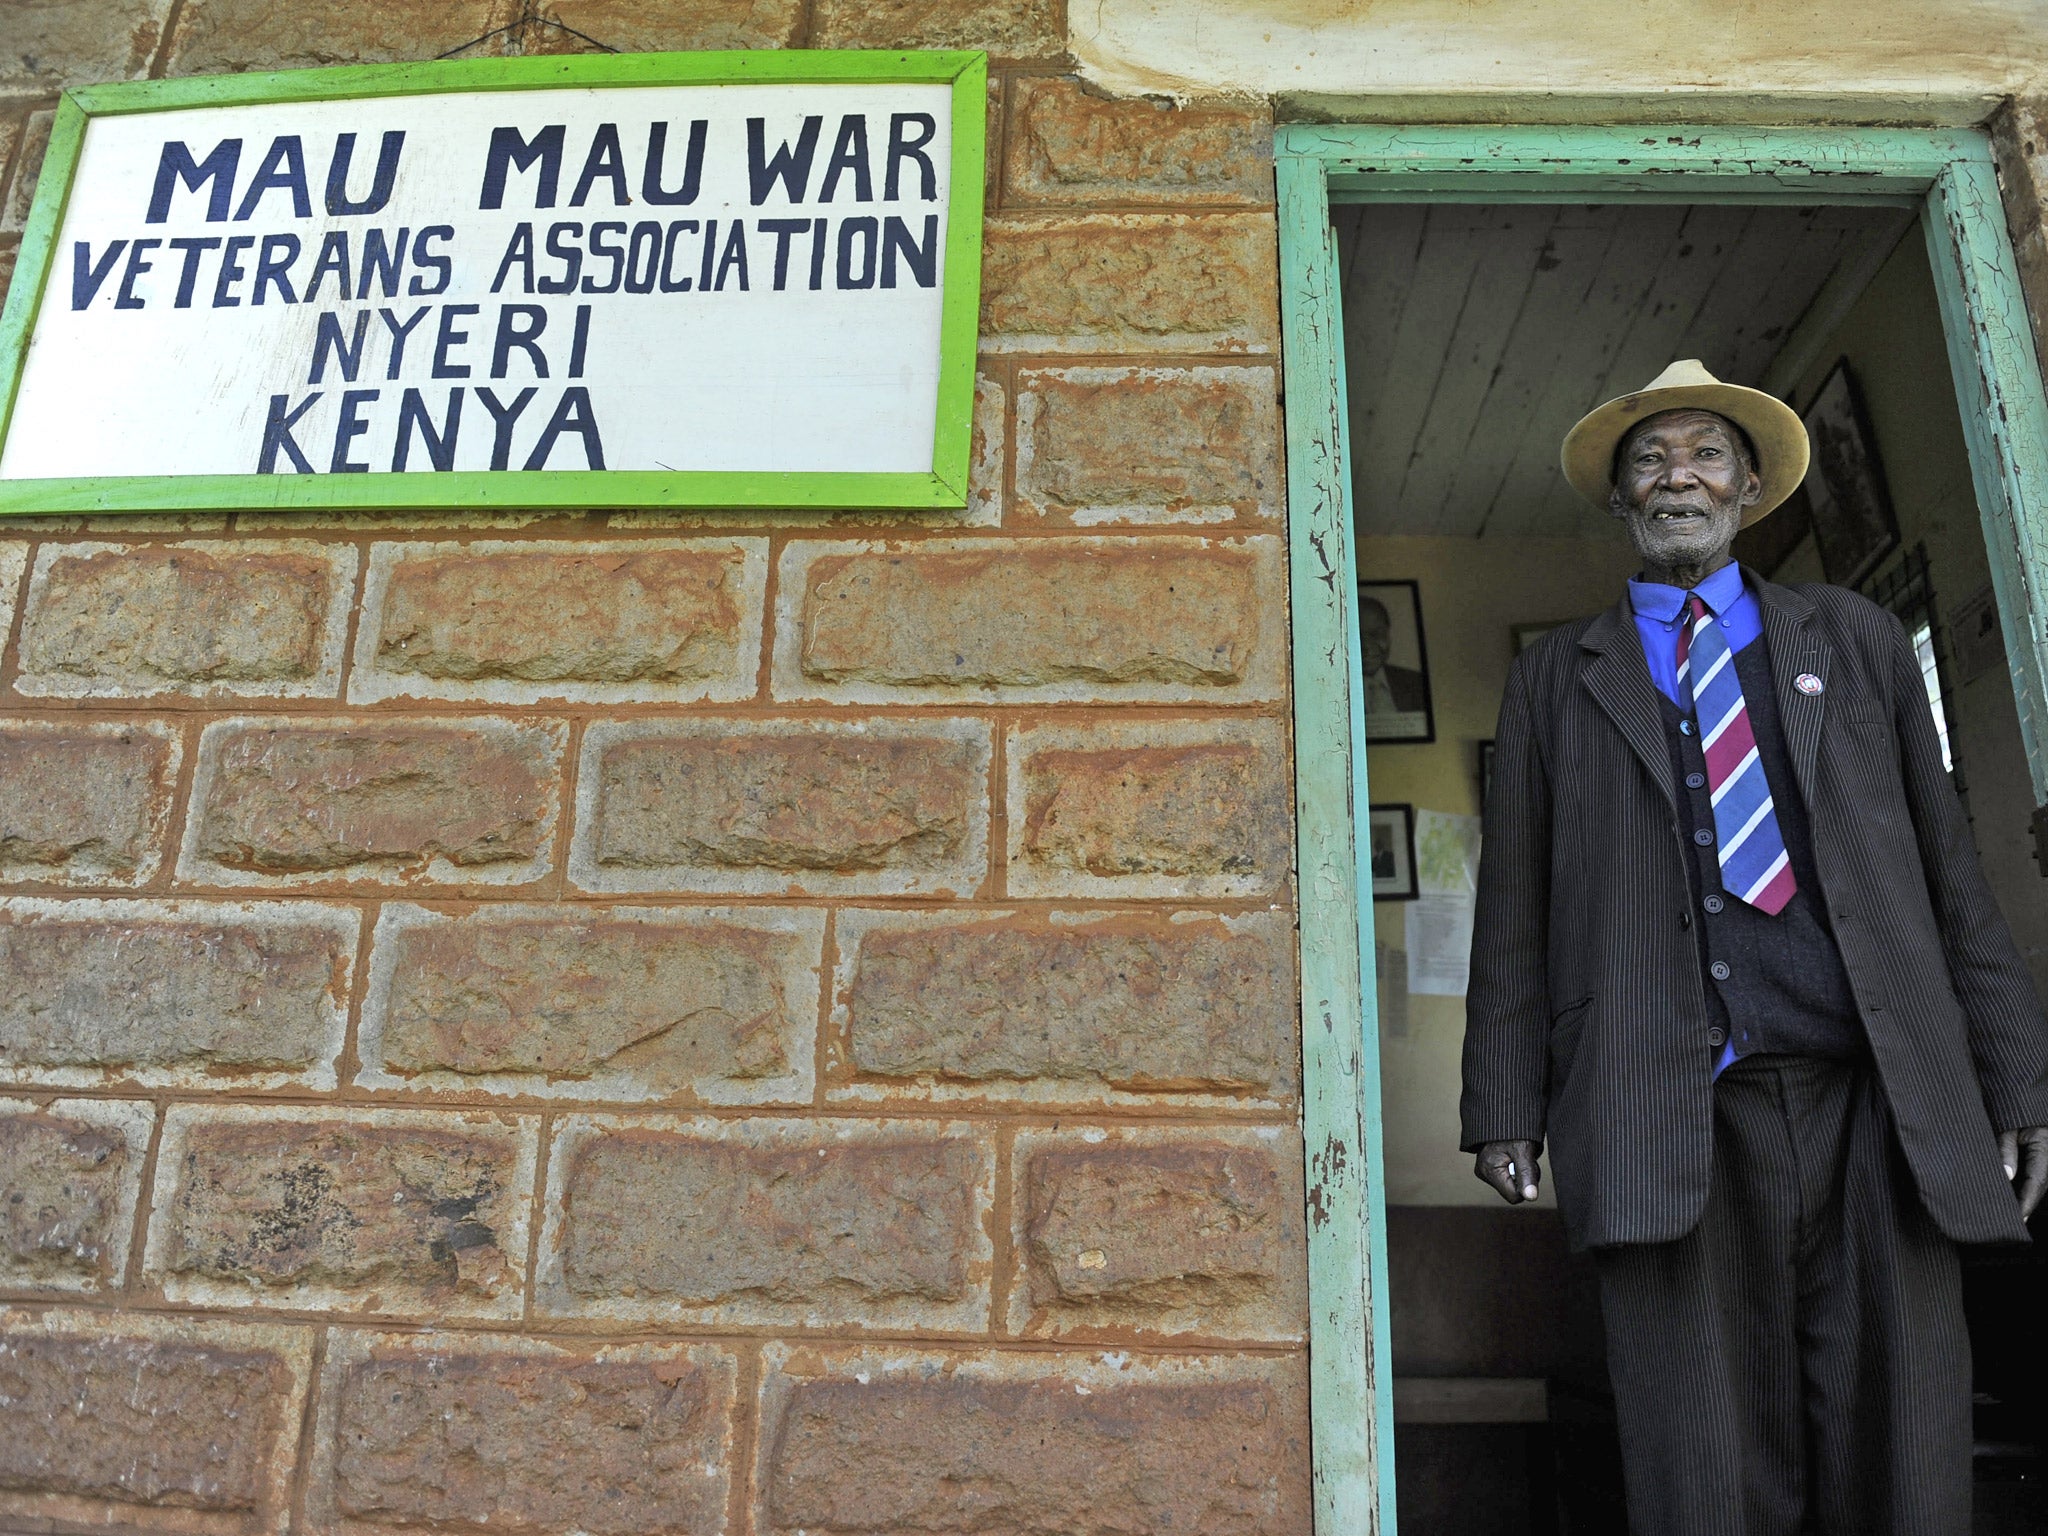 The Mau Mau War Veterans Association in the central town of Nyeri